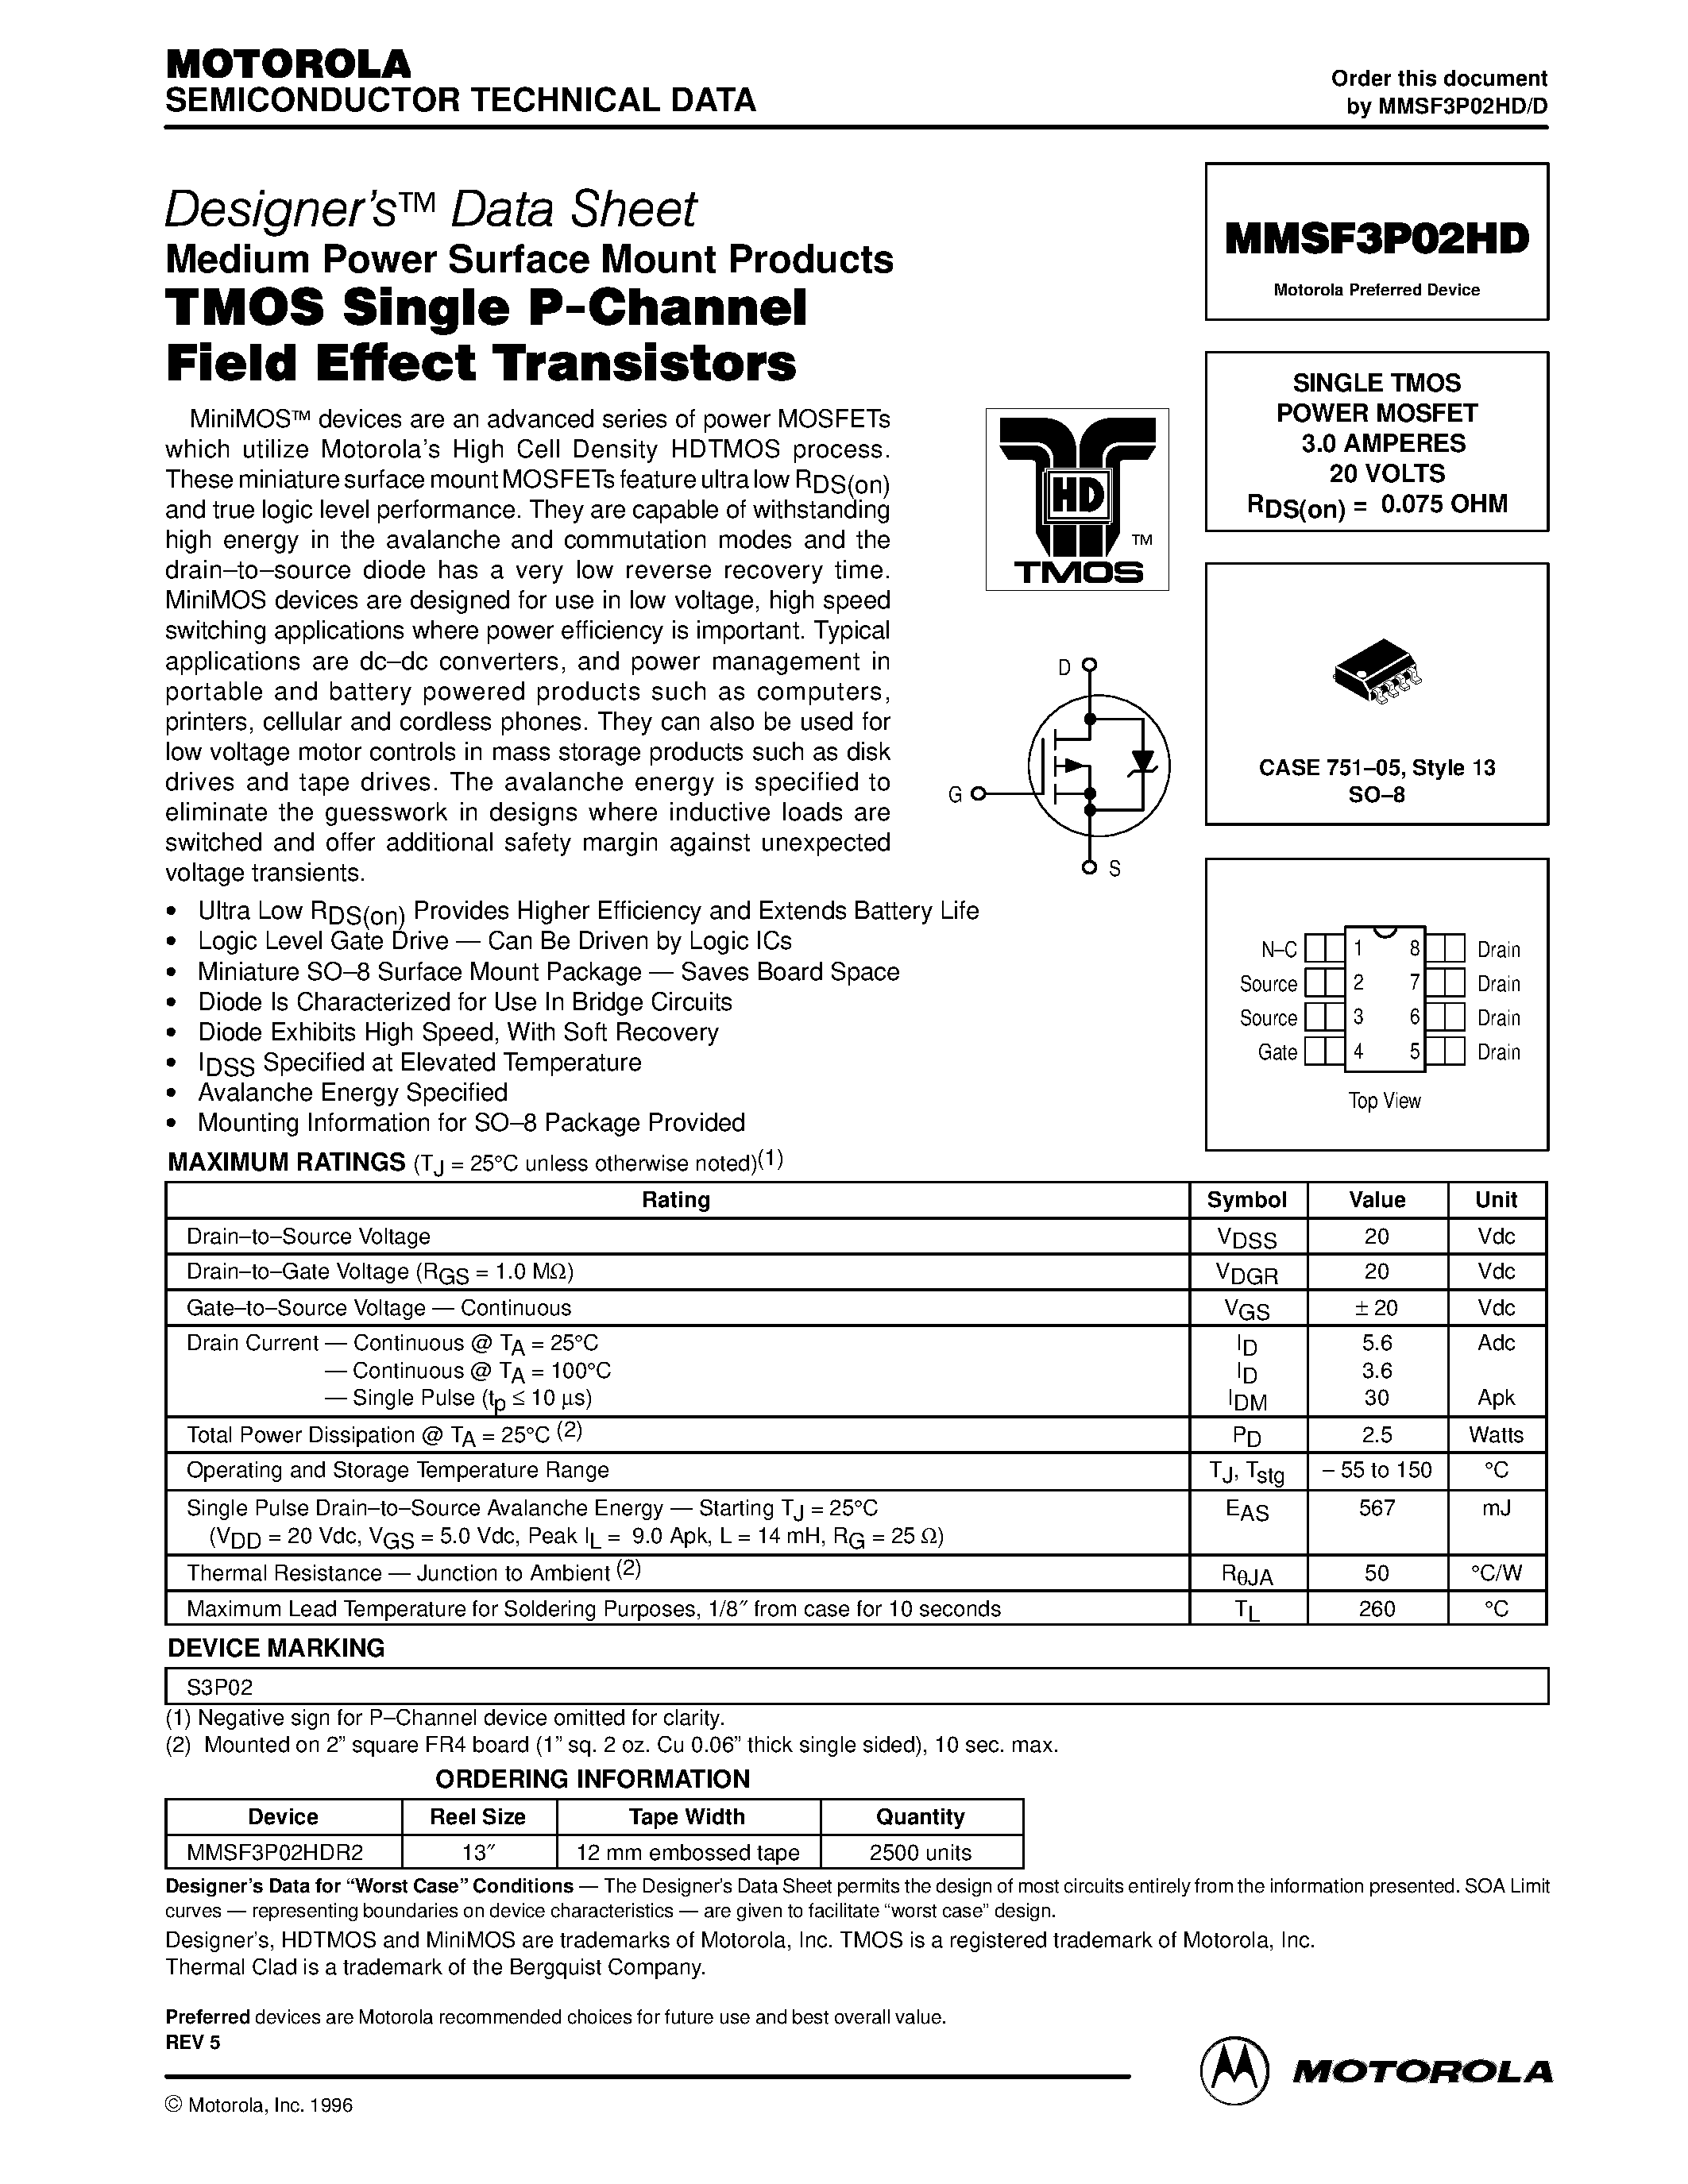 Даташит MMSF3P02HD - SINGLE TMOS POWER MOSFET 3.0 AMPERES 20 VOLTS страница 1